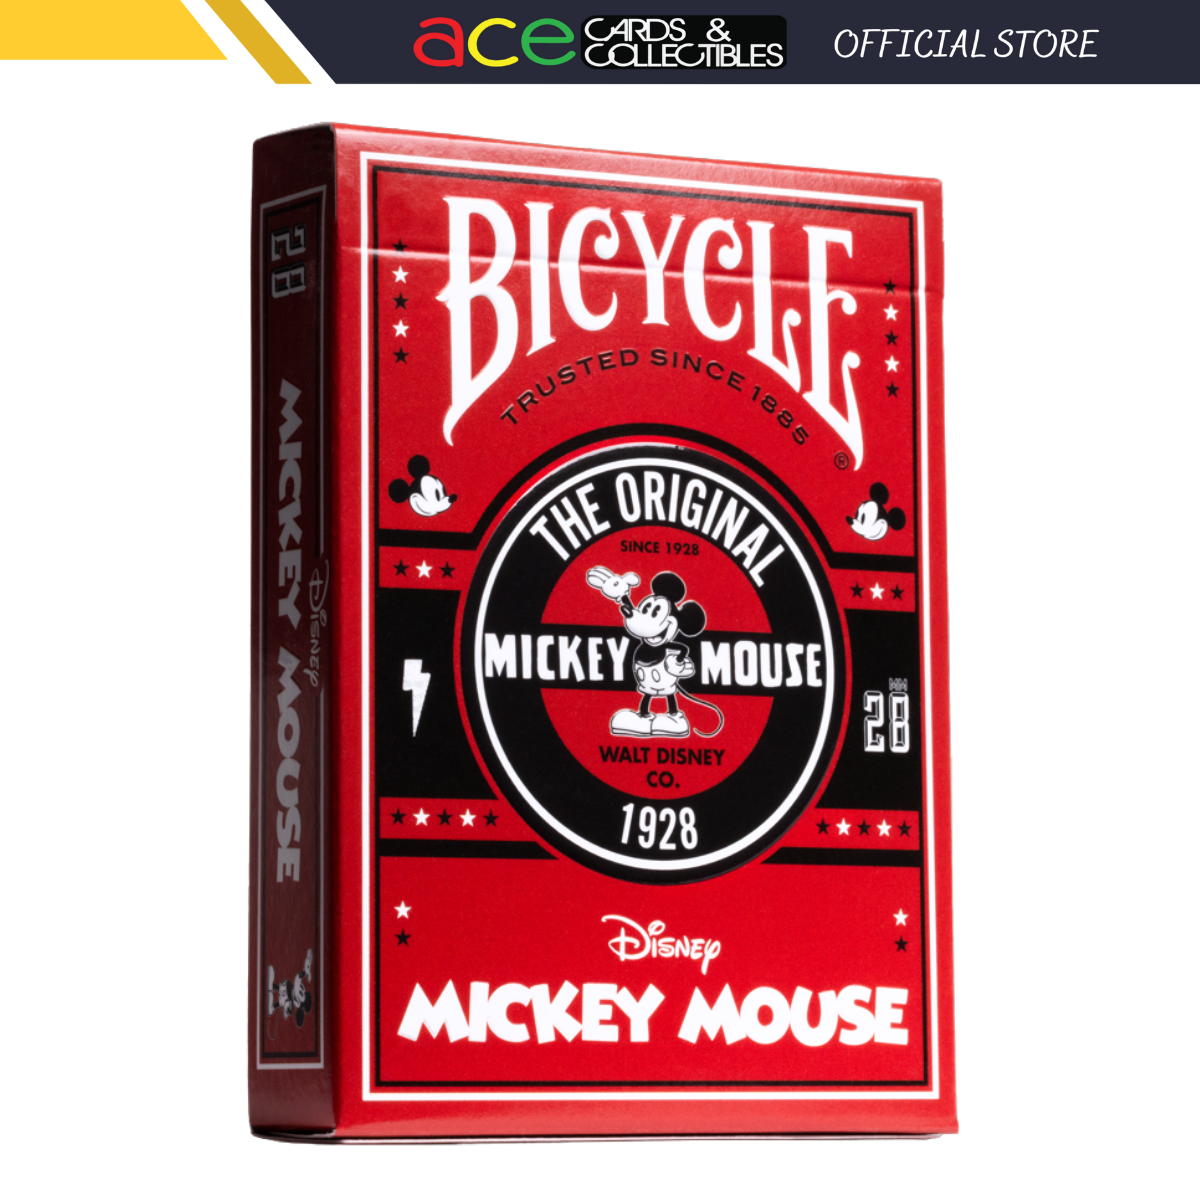 Bicycle Disney Classic Mickey Playing Cards-United States Playing Cards Company-Ace Cards & Collectibles